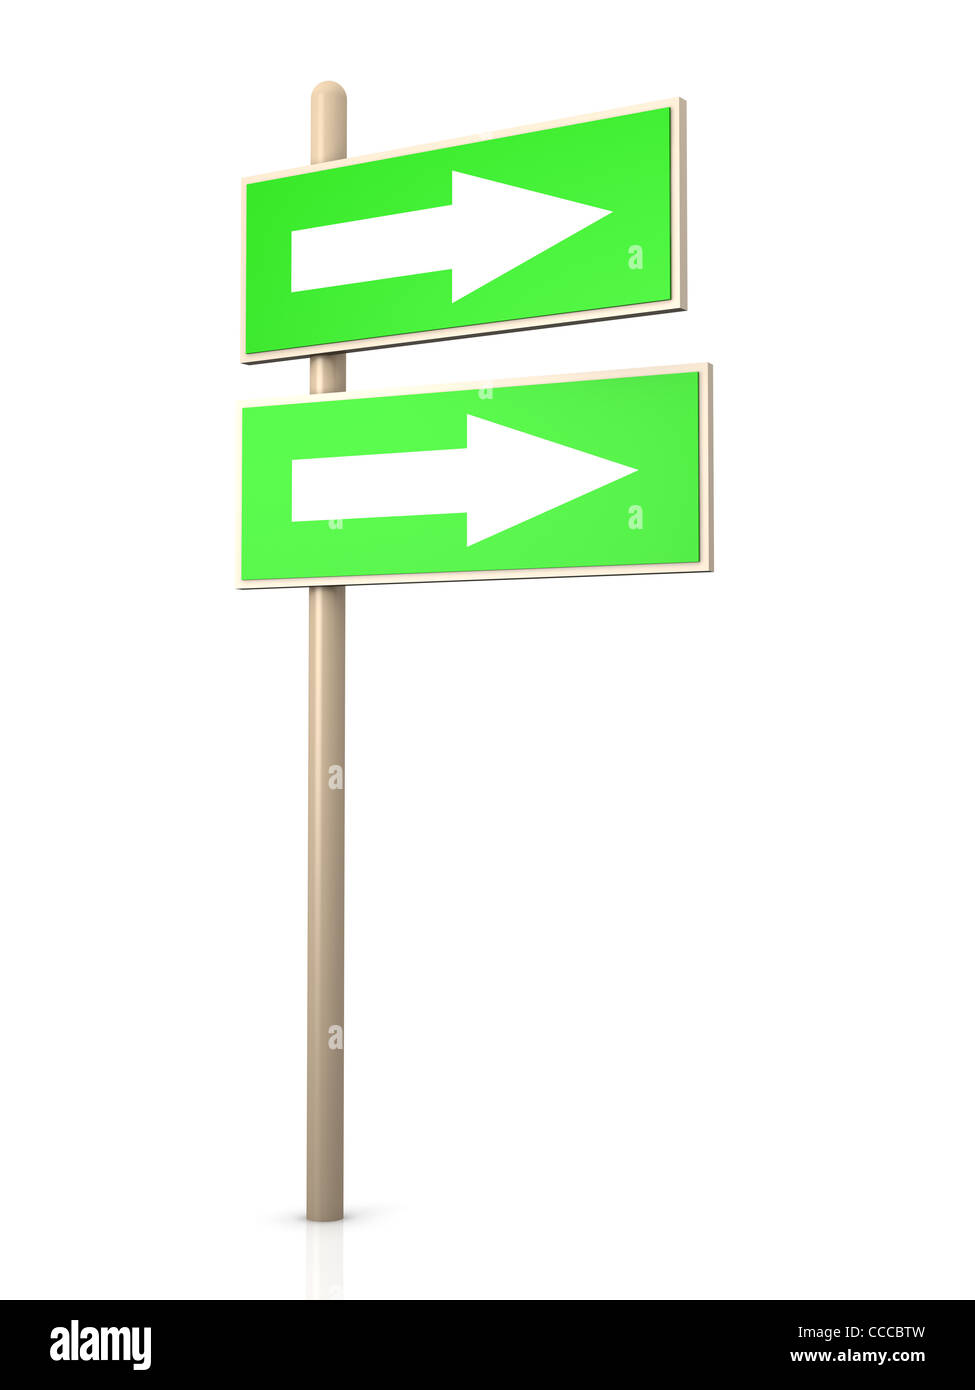 A Signpost. Stock Photo